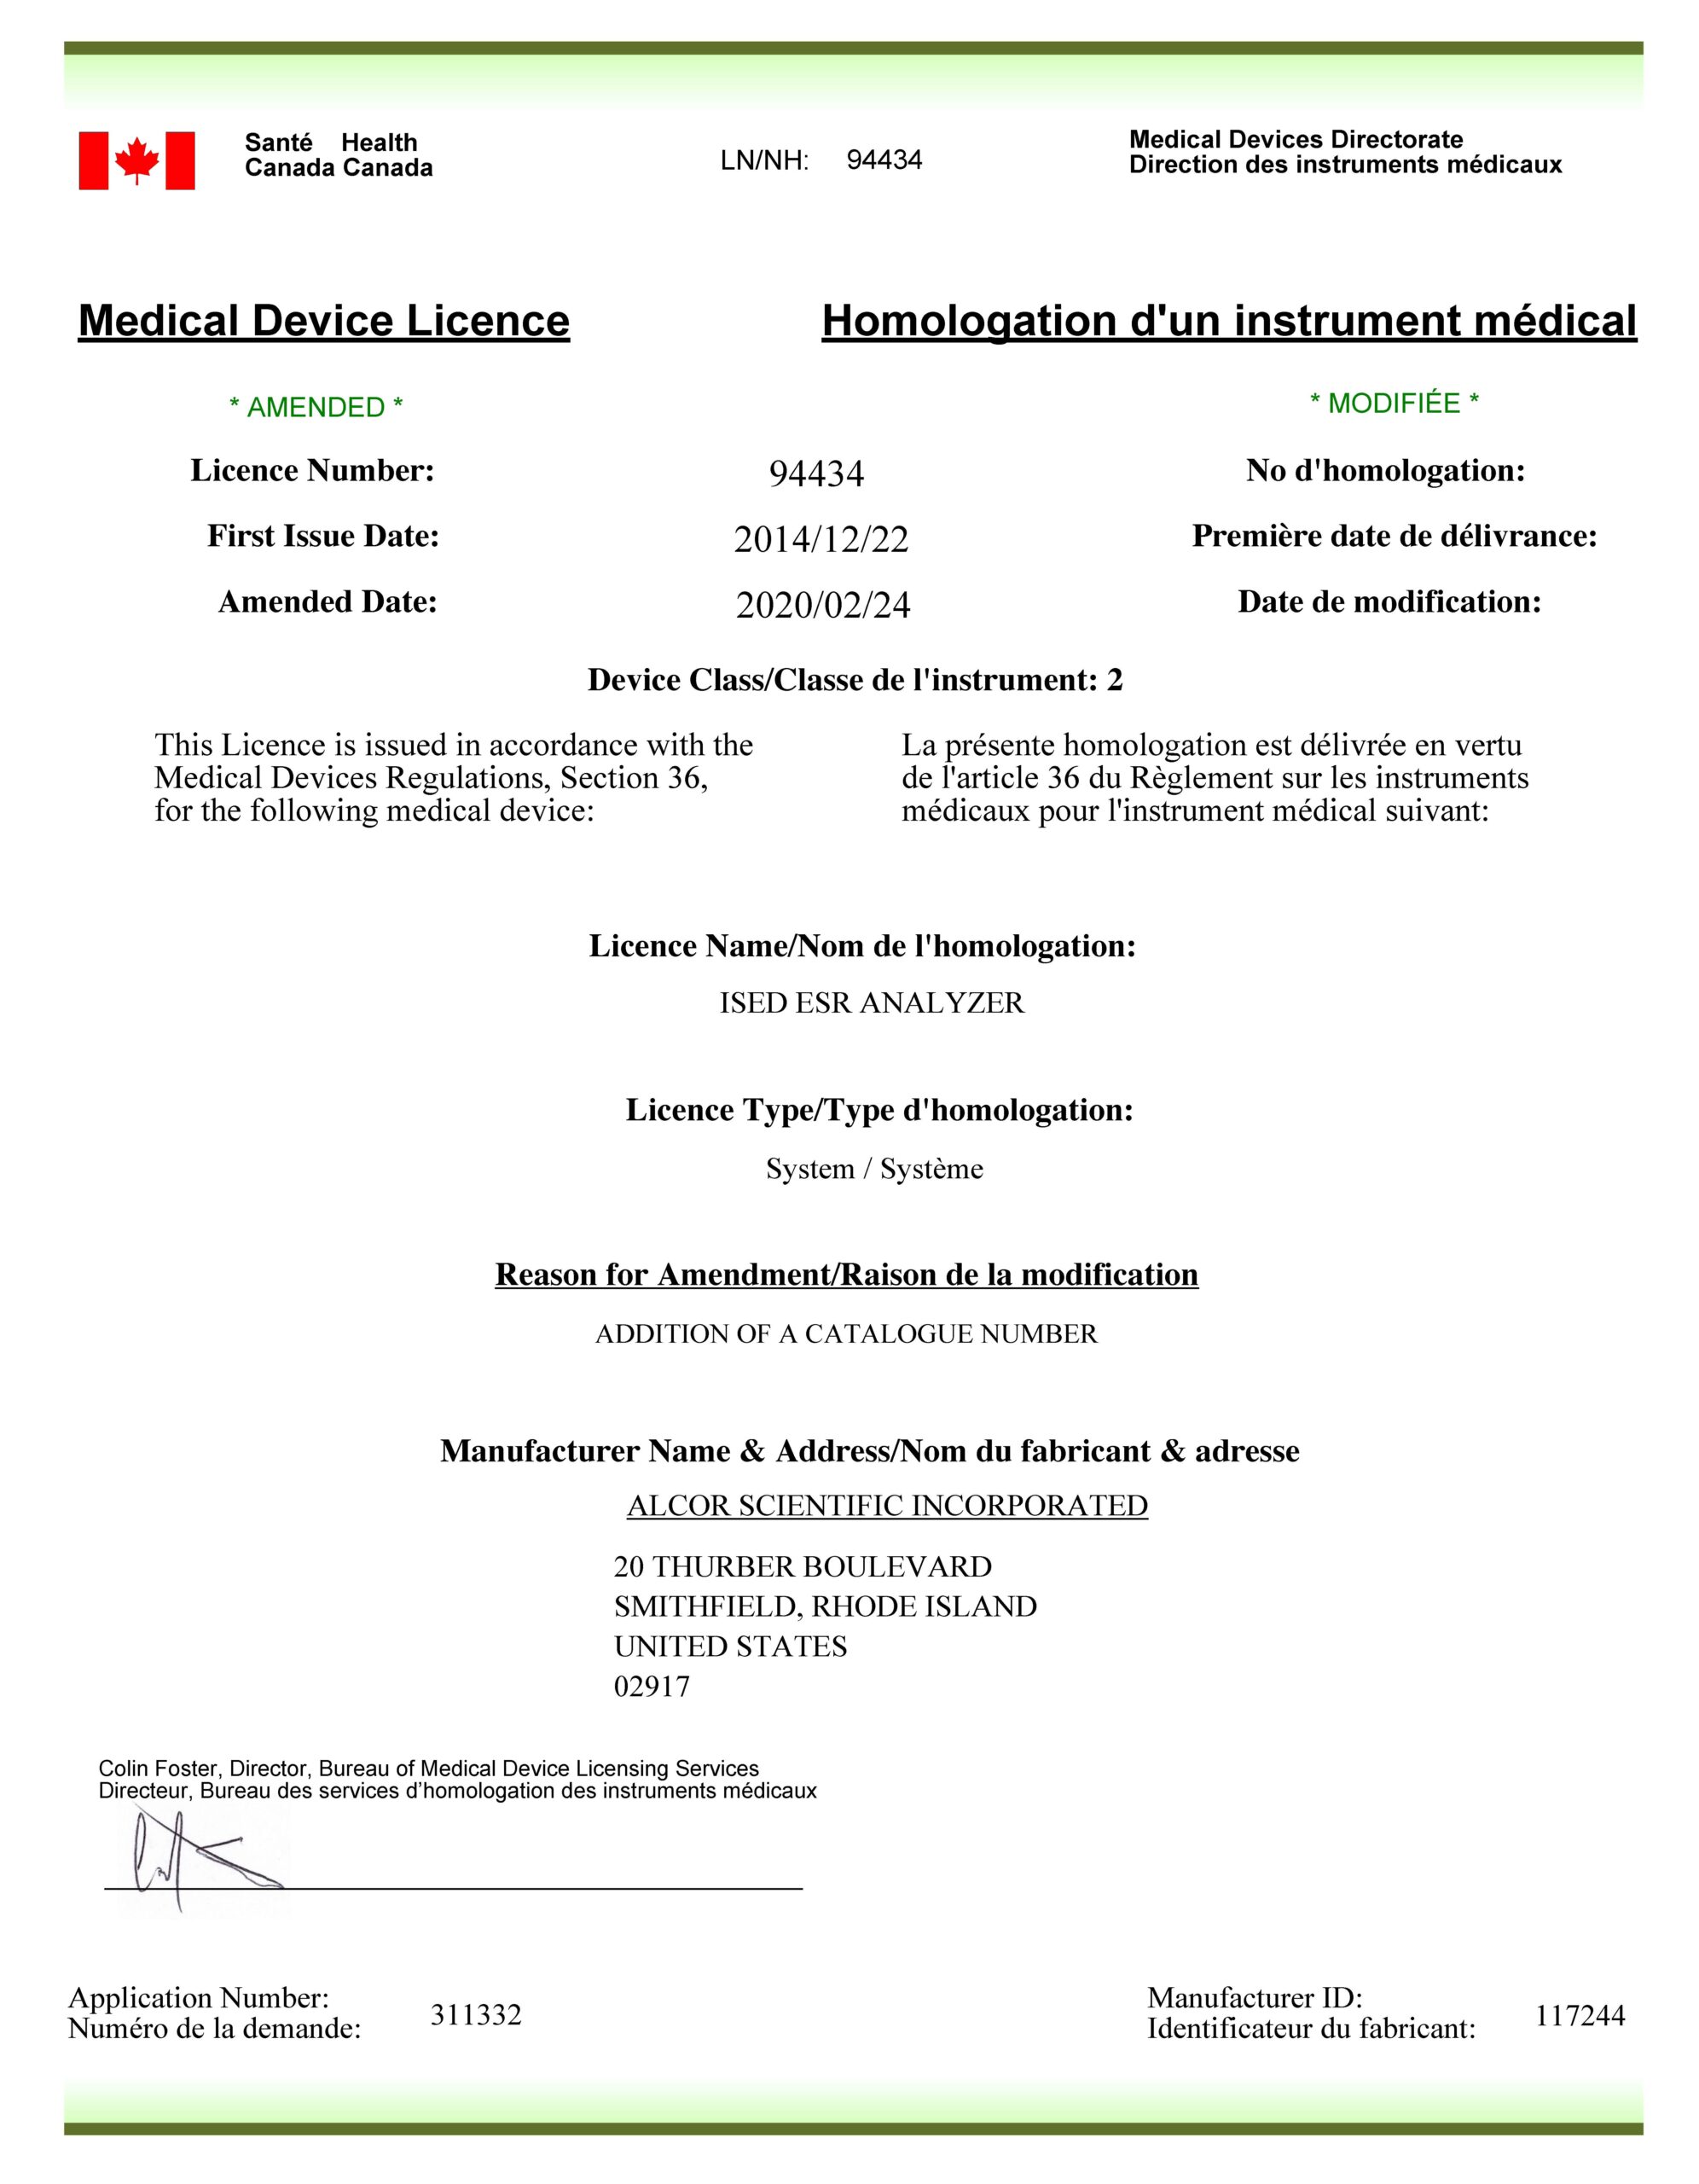 Copy of the Medical Device License number 94434 issued for ALCOR iSED ESR ANALYZER device.